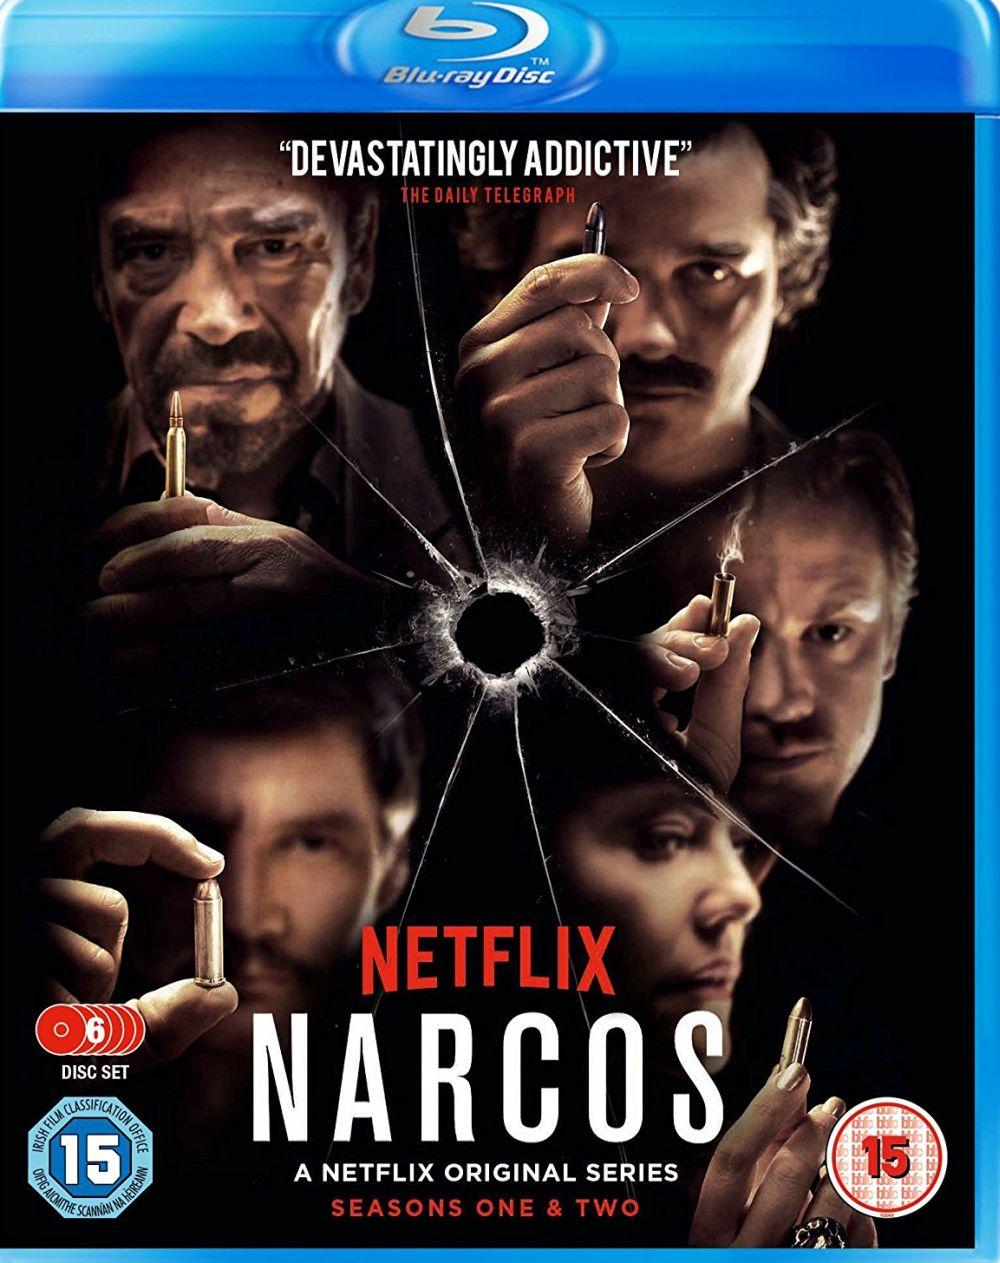 NARCOS: THE COMPLETE SEASONS ONE AND TWO (2016) 6BRD